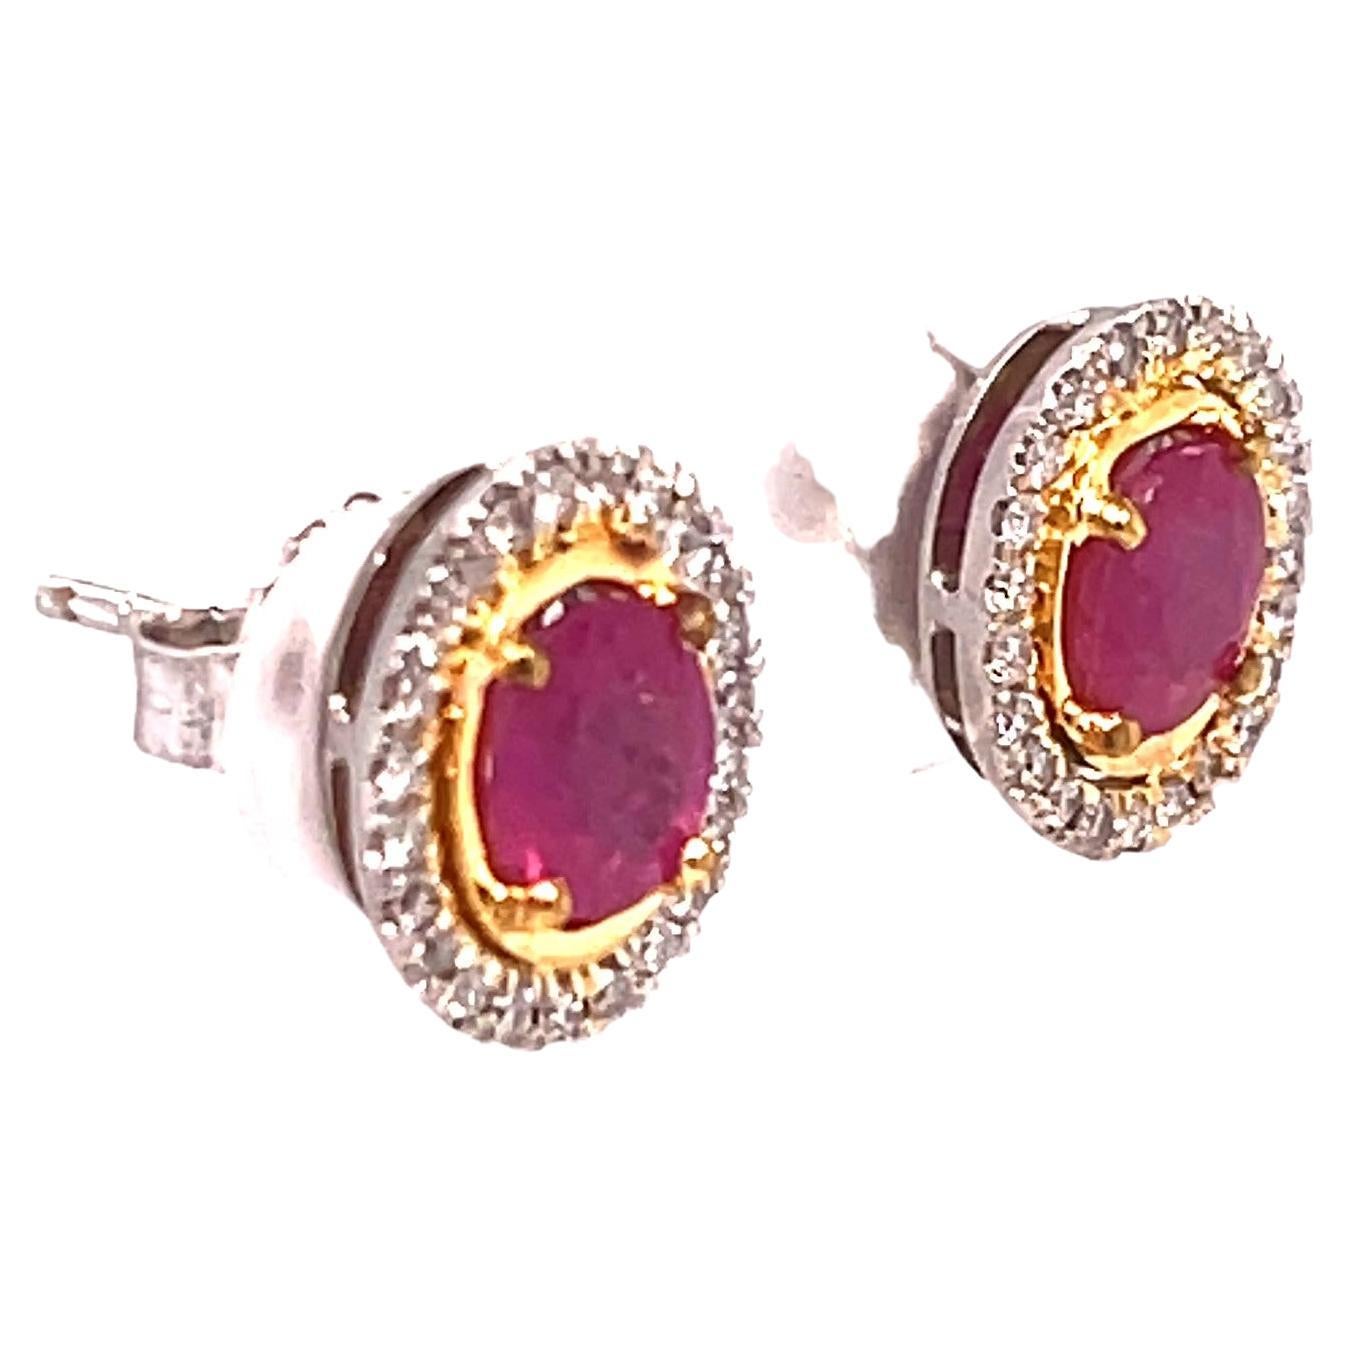 Oval Ruby and Diamond Stud Earrings 2.29 carats 

Oval Ruby weighs 0.86 carat

Oval Ruby weighs 0.93 carat

Total Carat Weight of Rubies 1.79 carats

Measurement: 6.5 x 5.2mm

Round Diamond total carat weight 0.50 carat

G-I Color VS Clarity

TOTAL